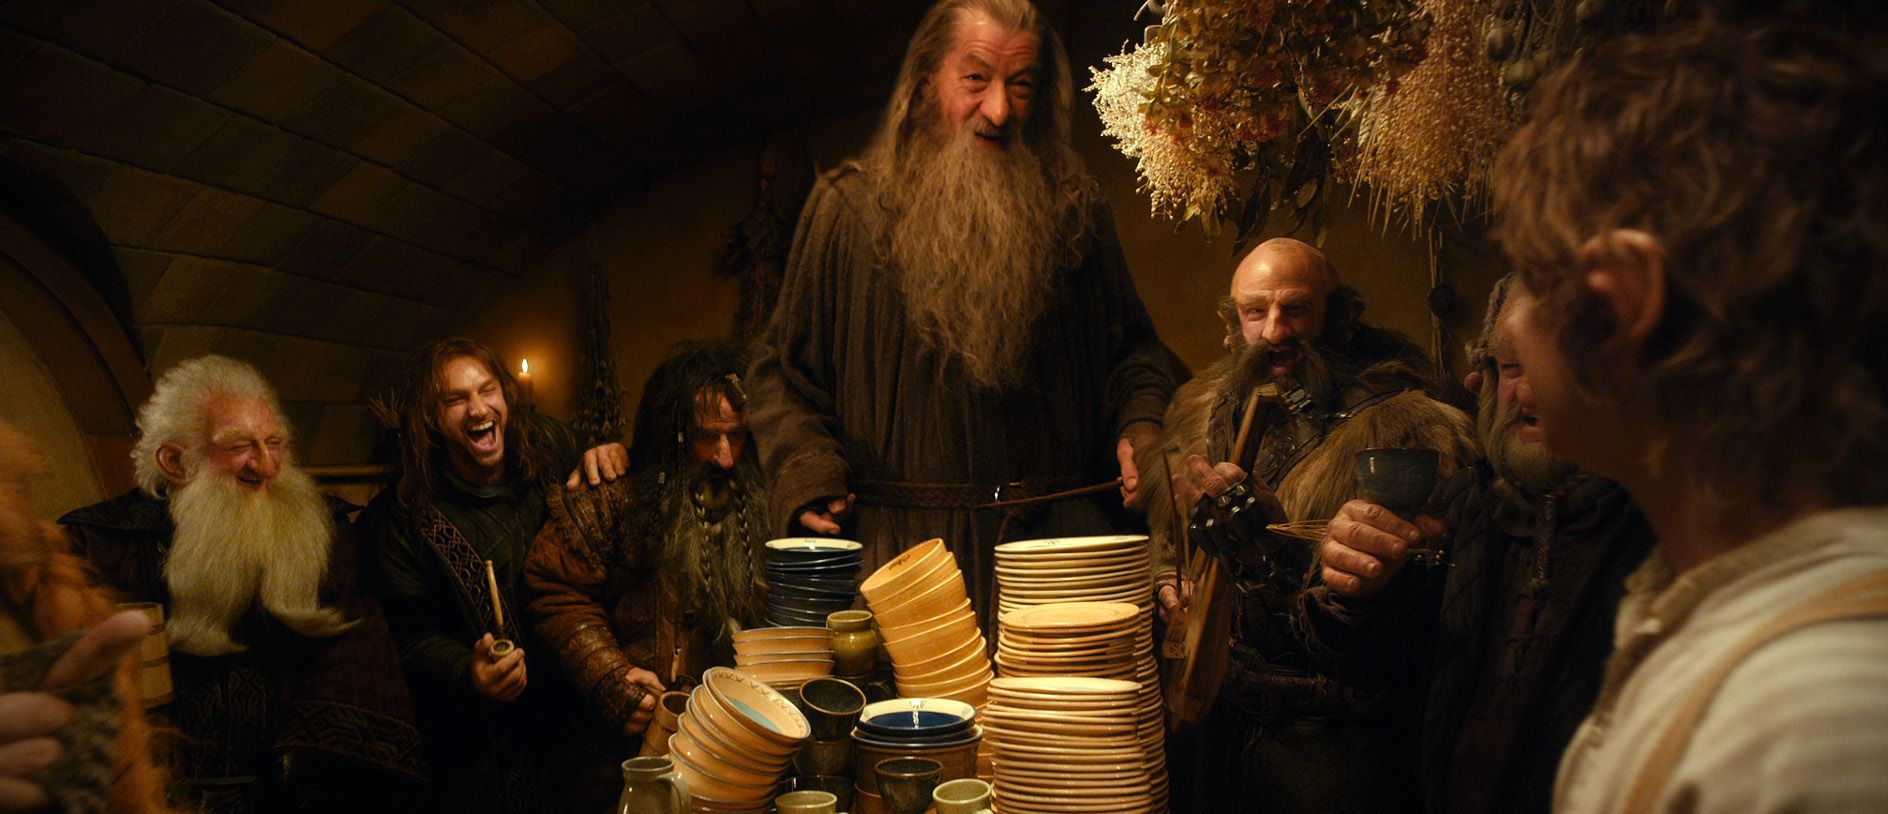 The Hobbit: An Unexpected Journey Photo #4